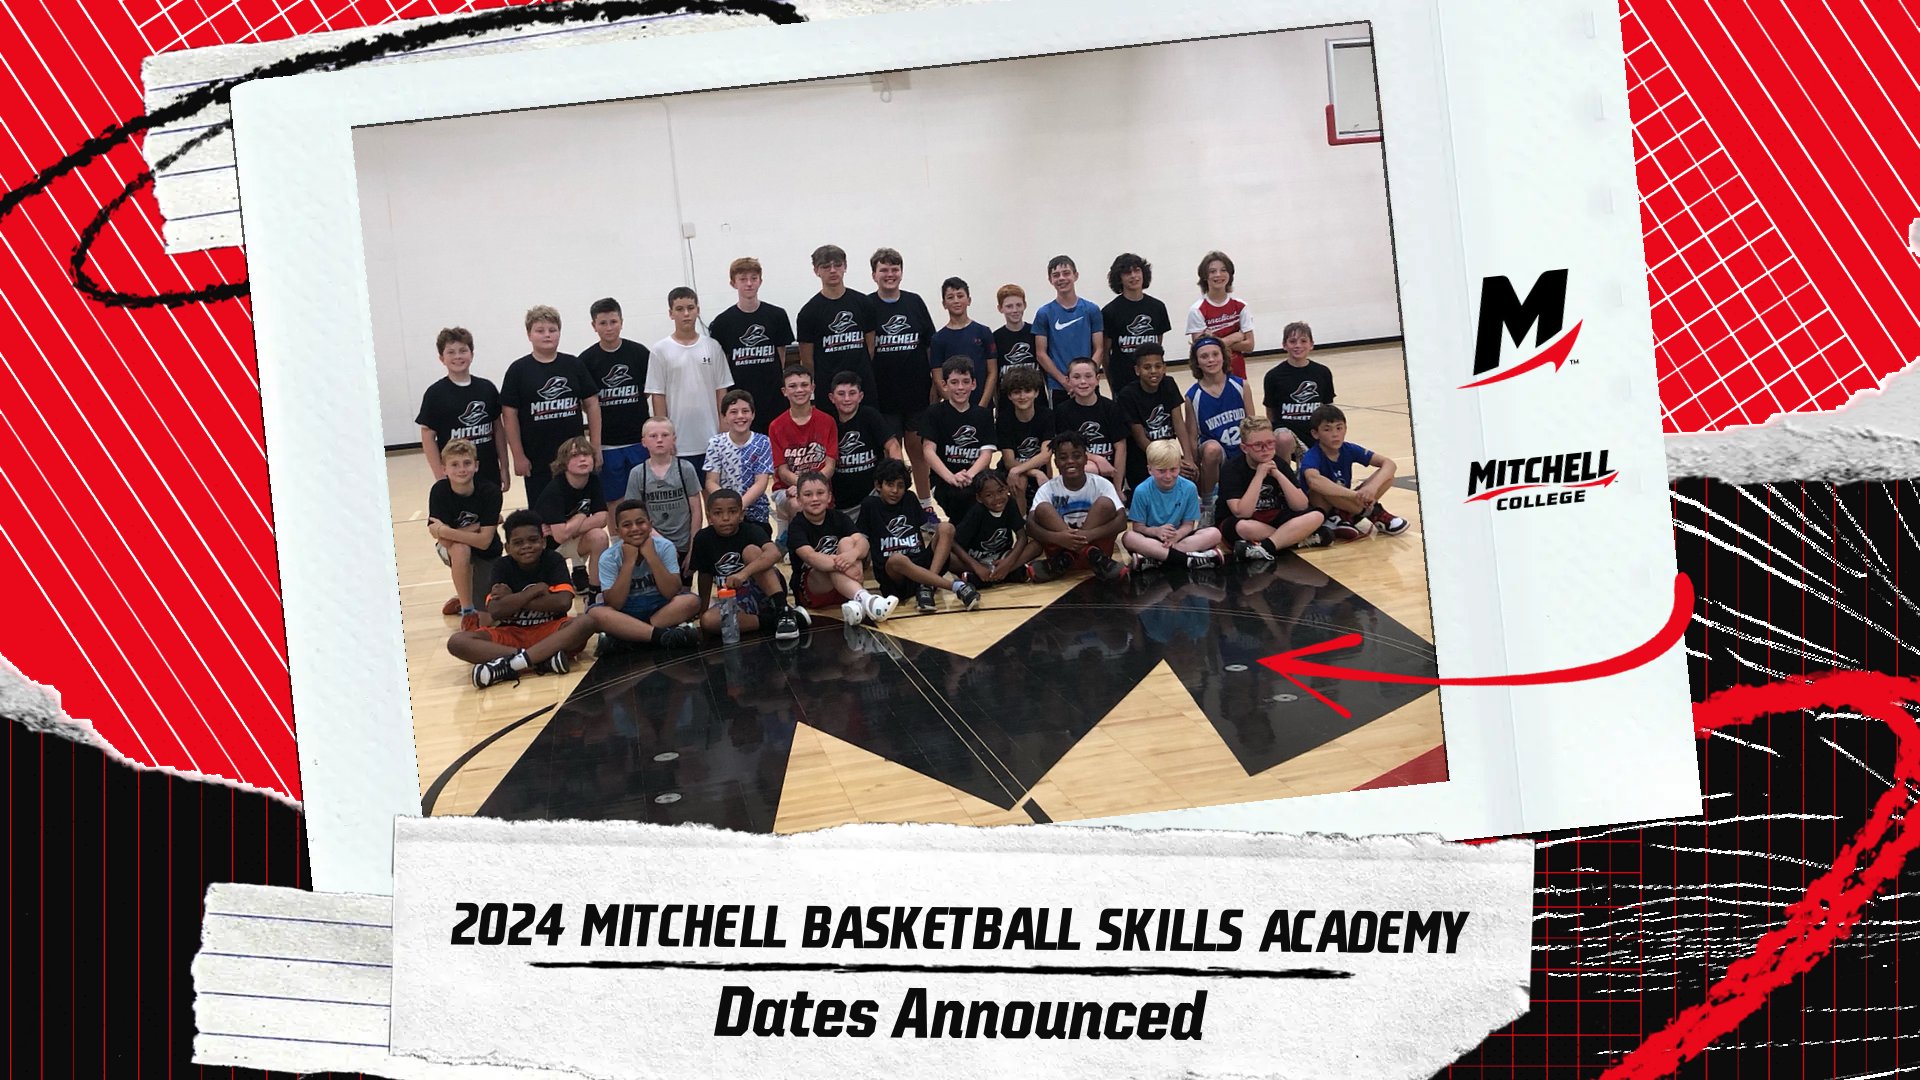 Dates Announced for 2024 Mitchell Basketball Skills Academy